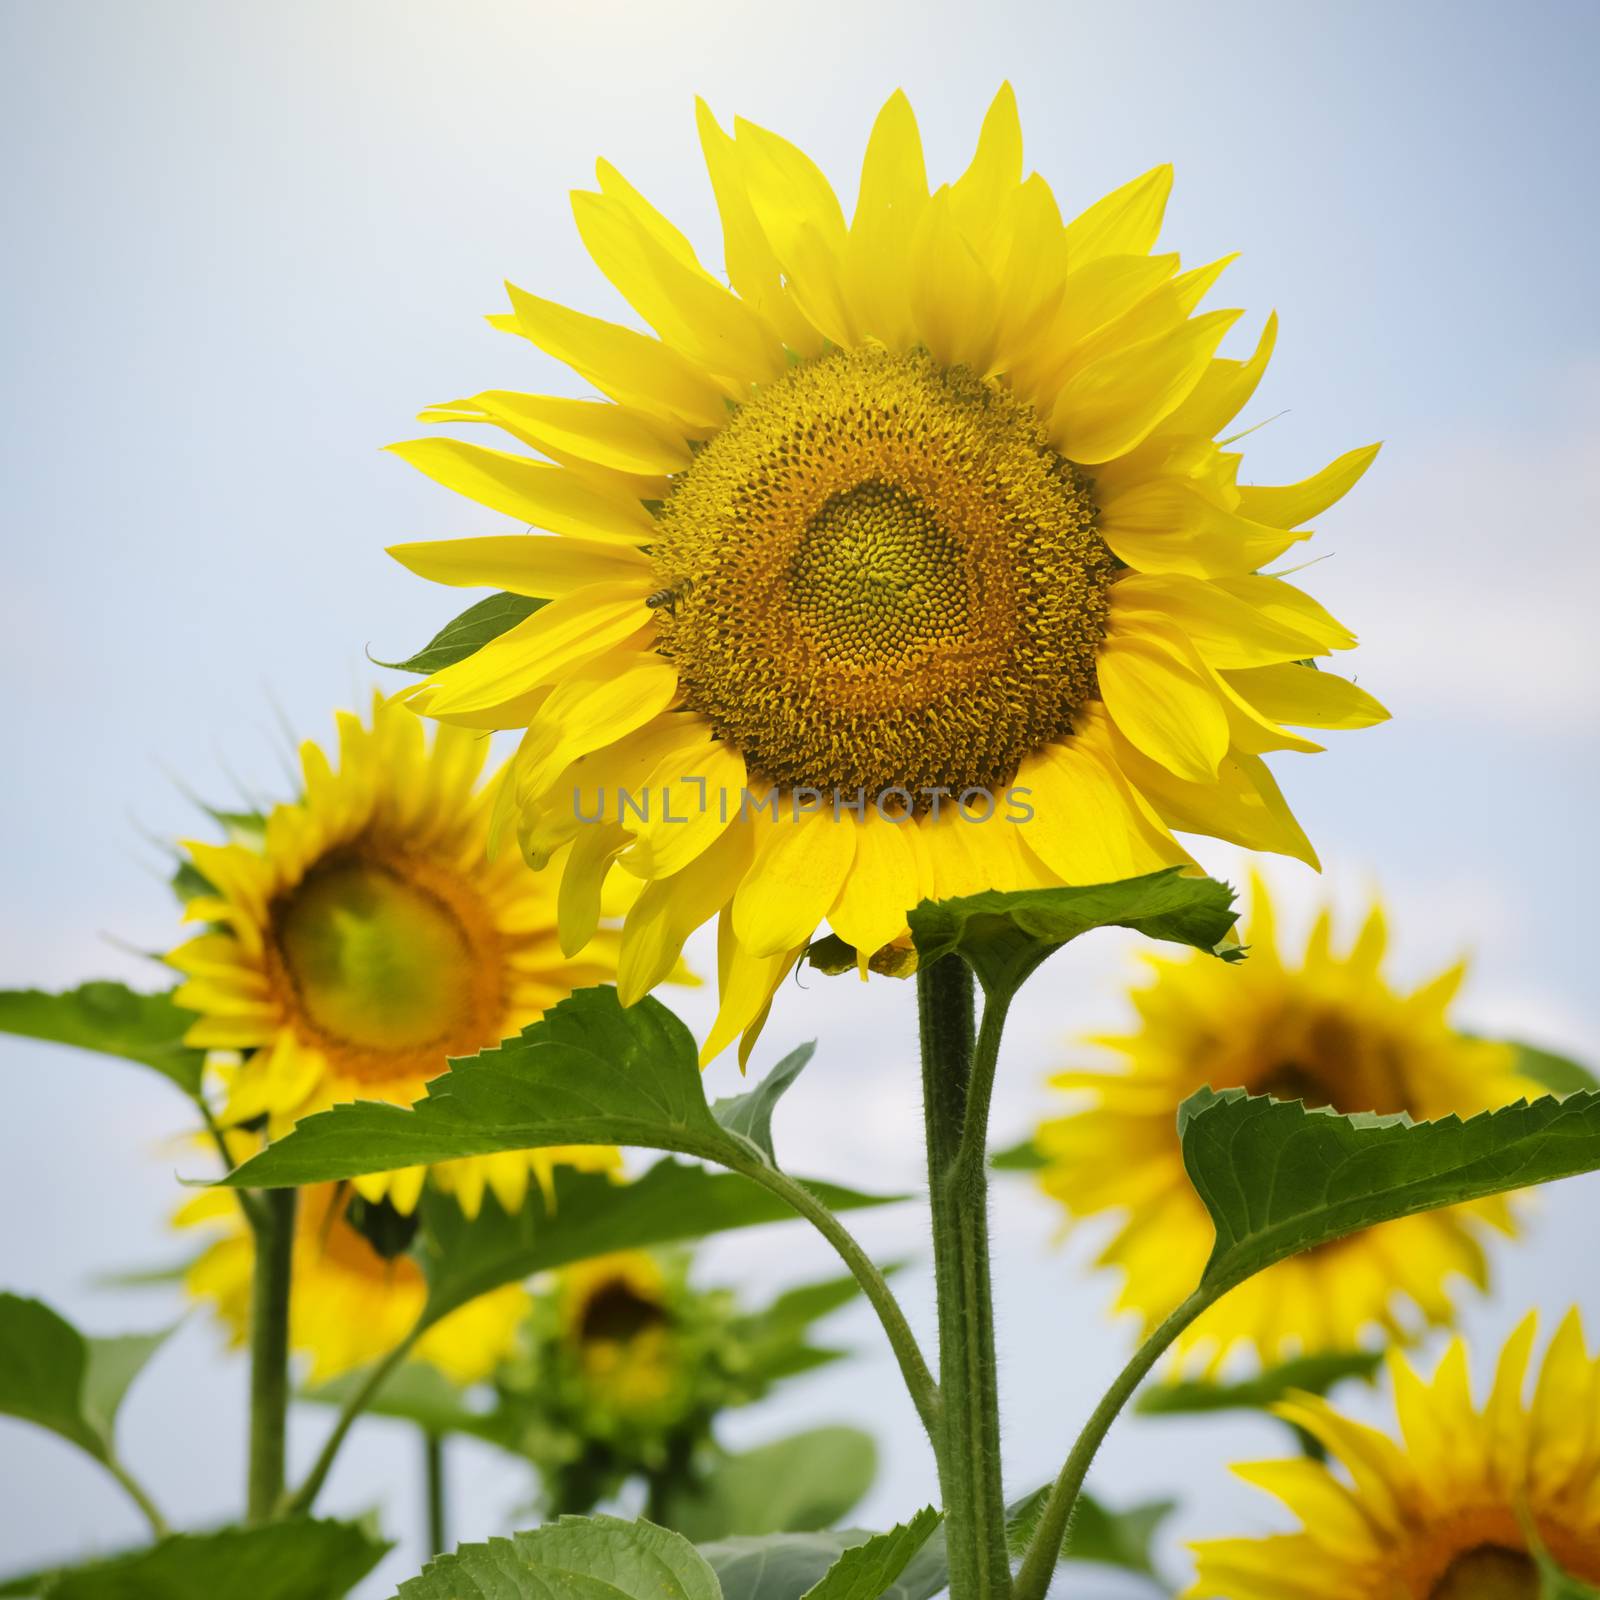 Yellow Sunflower Over Blue Sky in Sunny Summer Day 